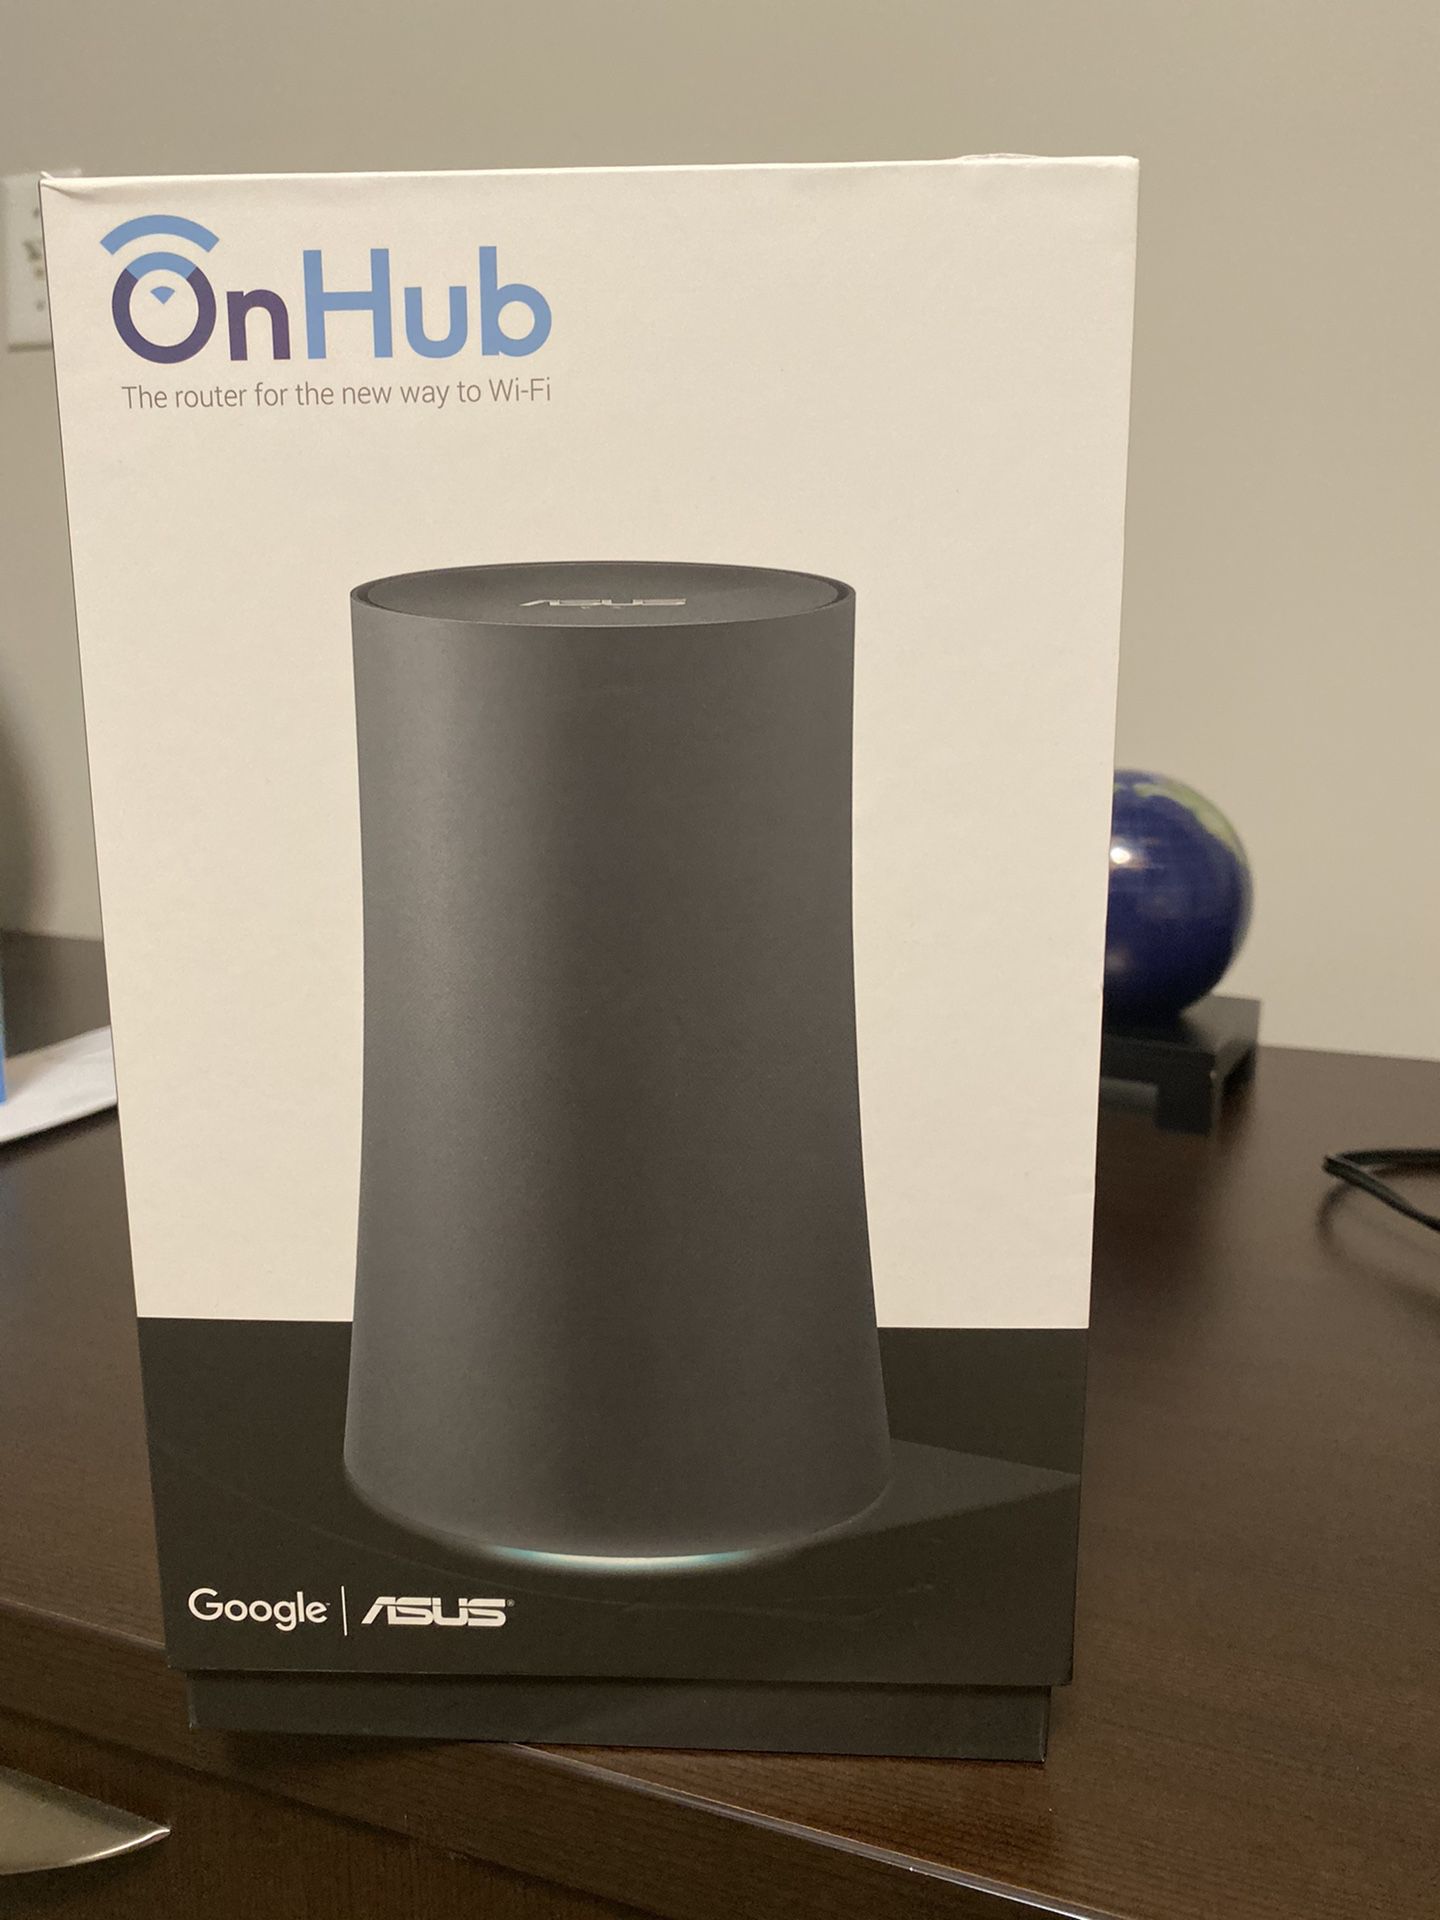 Google Asus OnHub Dual Band Wireless Router